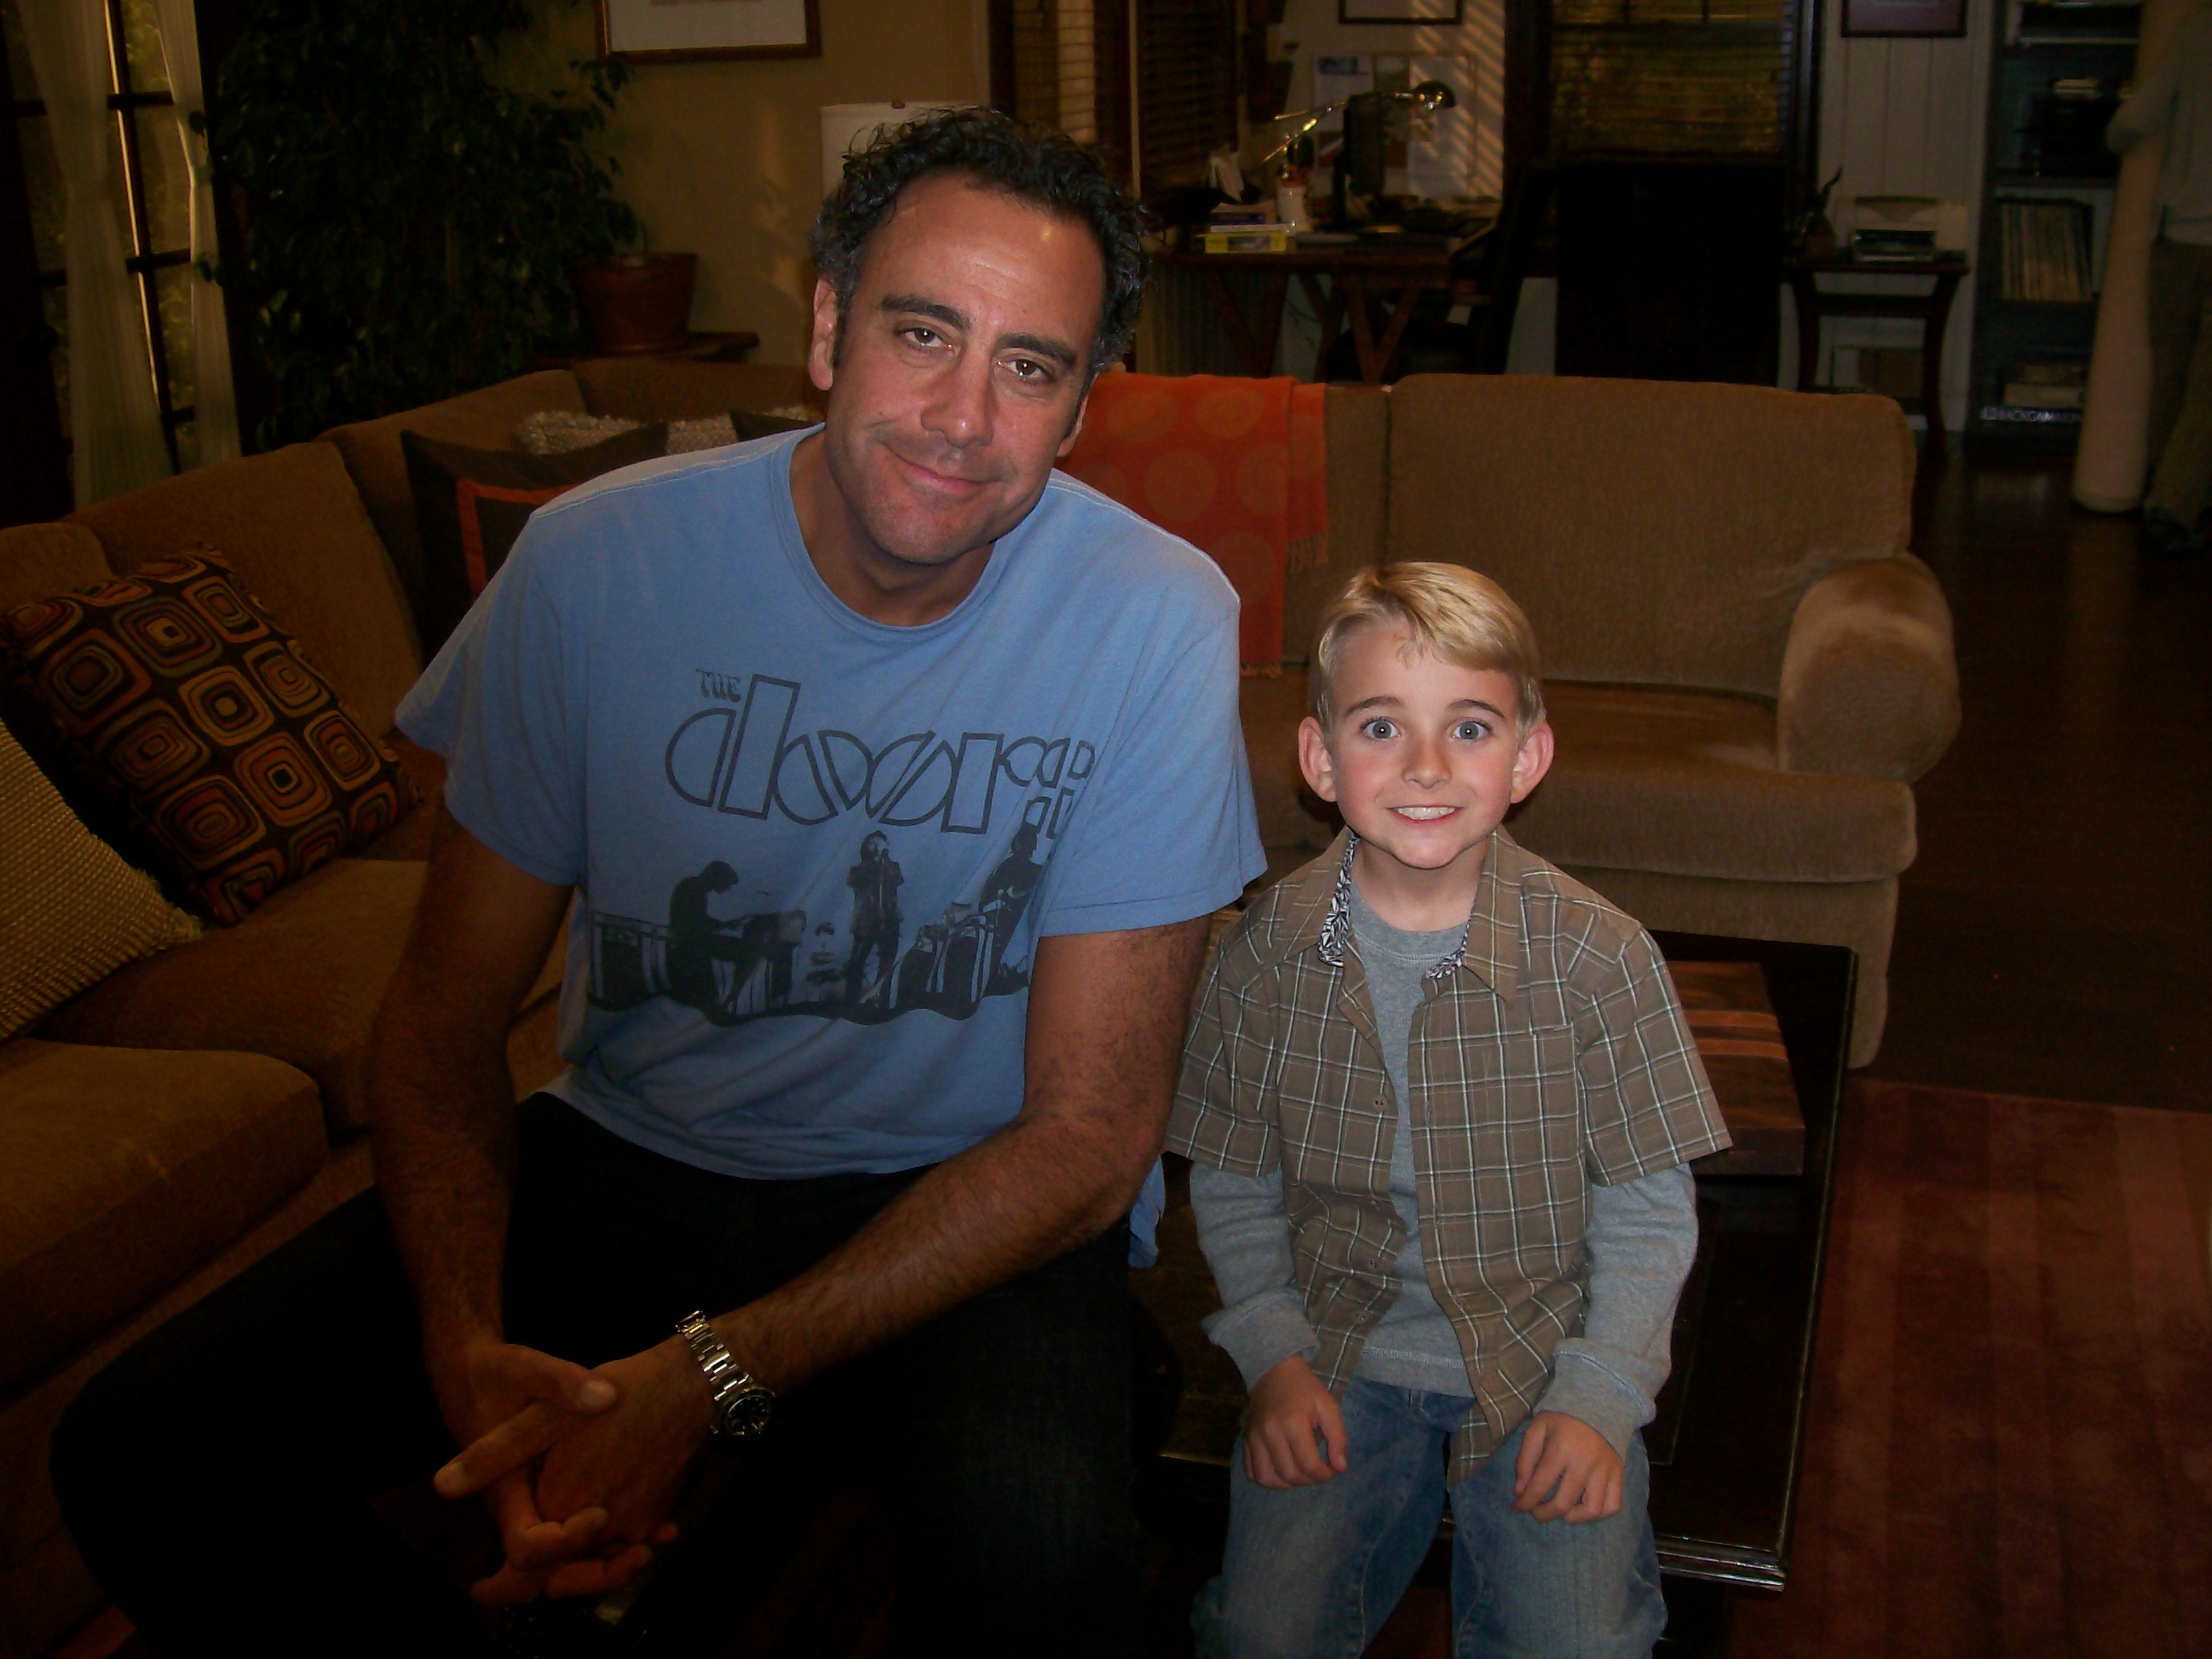 Hanging out with Brad Garrett after the live taping of the Til'Death episode 